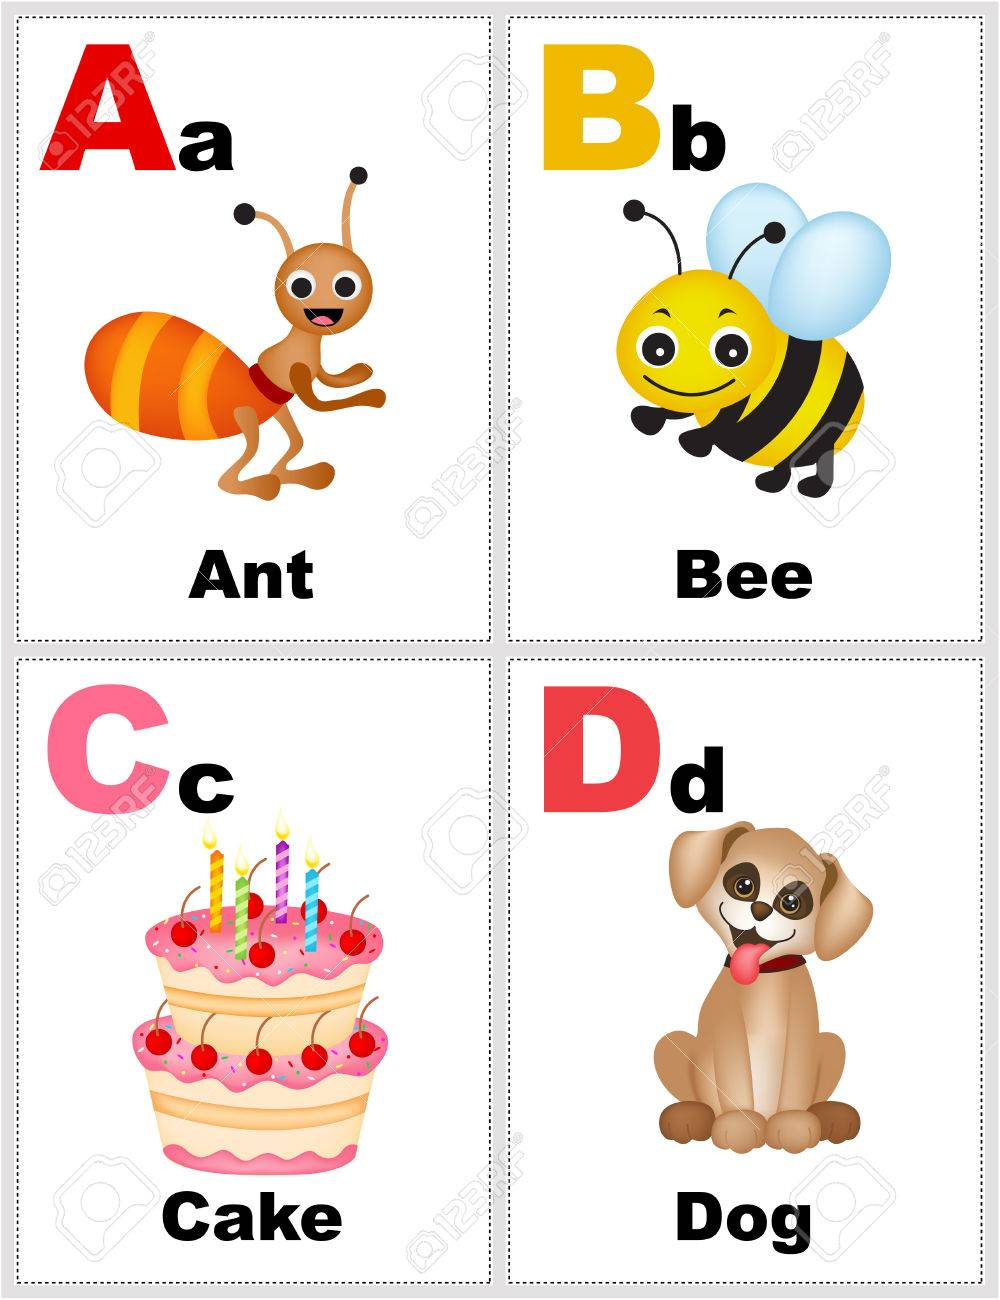 Alphabet Printable Flashcards Collection With Letter A,b,c,d - Free Printable Alphabet Flash Cards